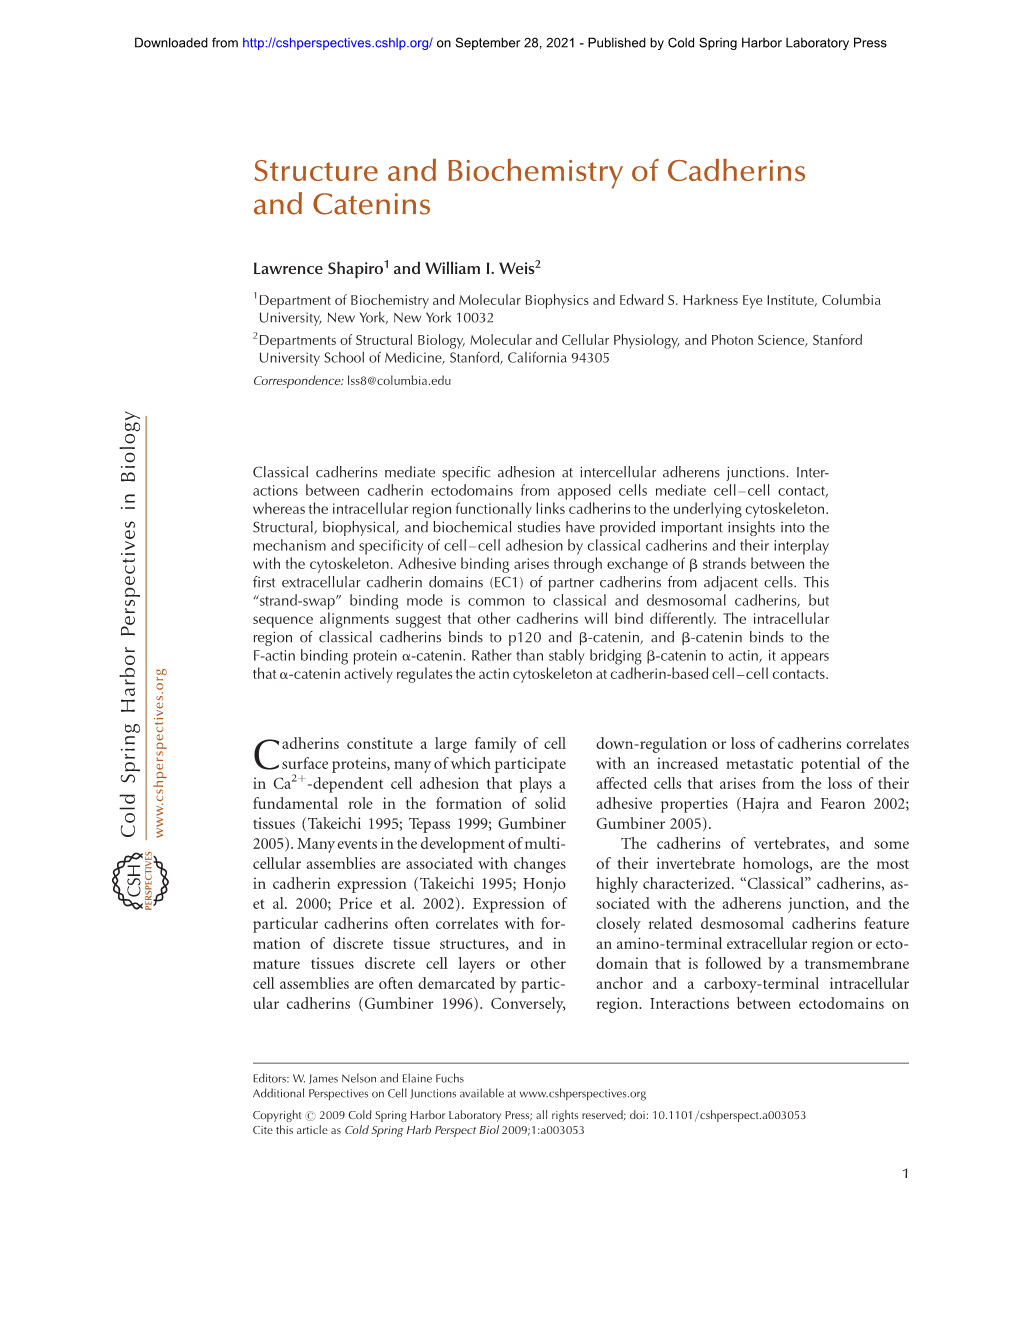 Structure and Biochemistry of Cadherins and Catenins